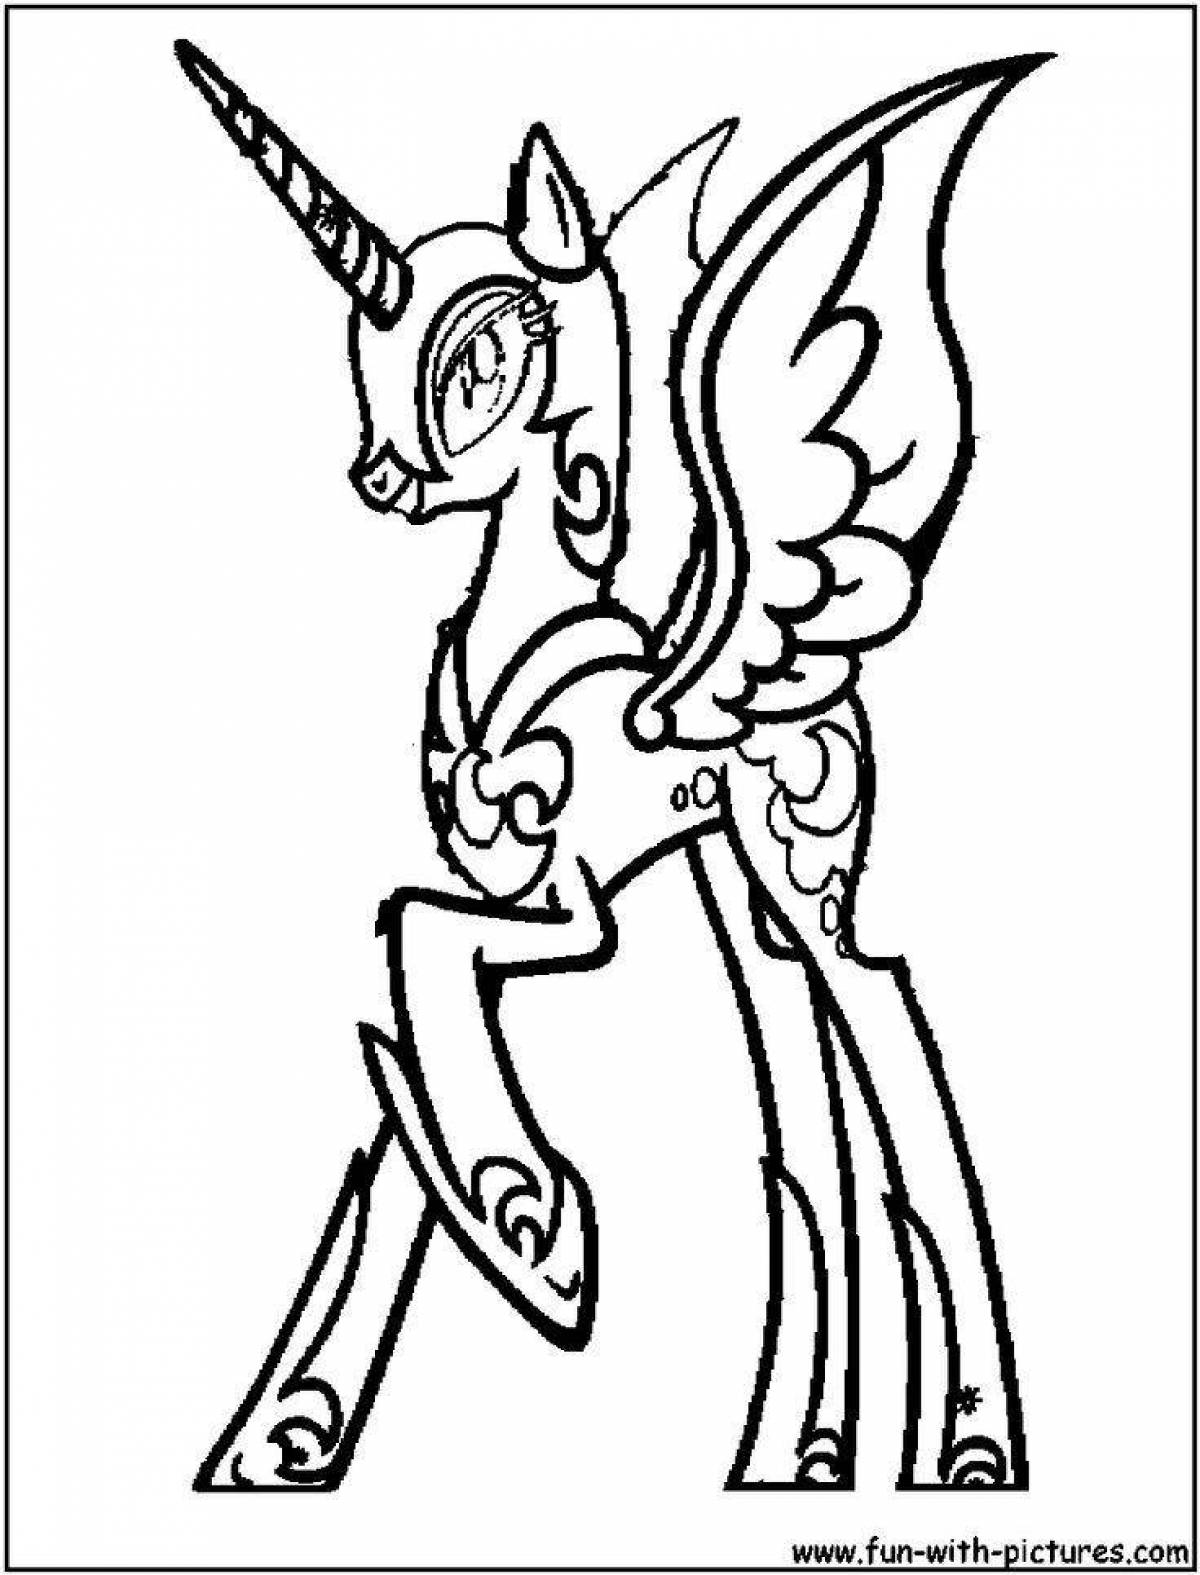 Dazzling moon pony coloring book